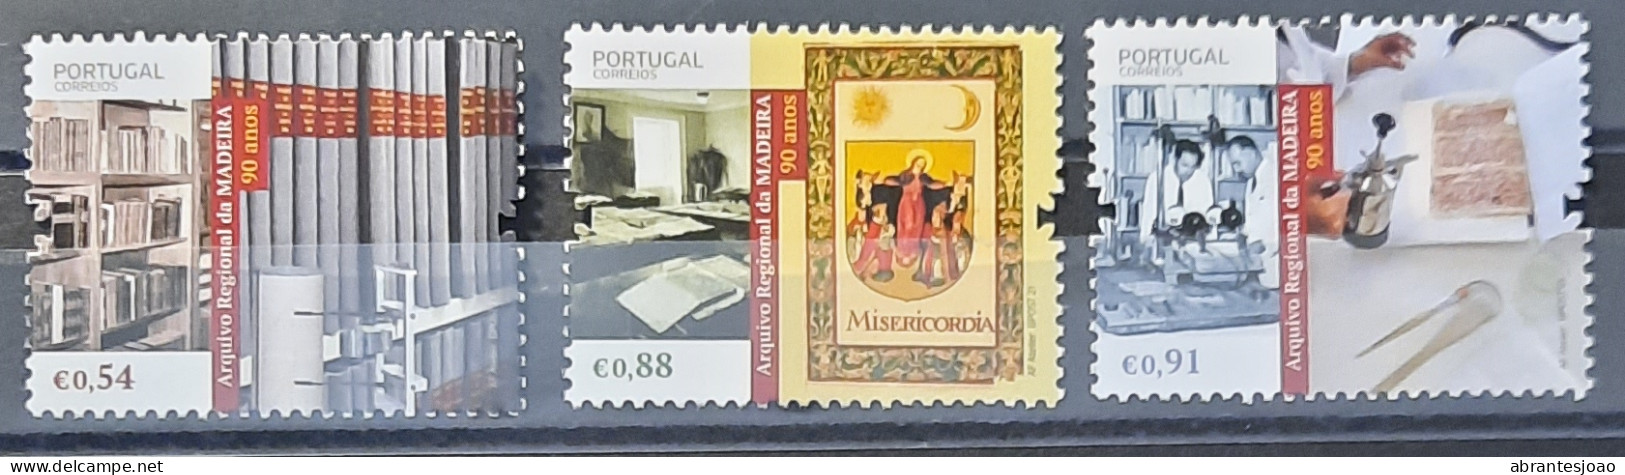 2021 - Portugal - MNH - 90 Years Of Regional Archives Of Madeira - 3 Stamps - Nuovi